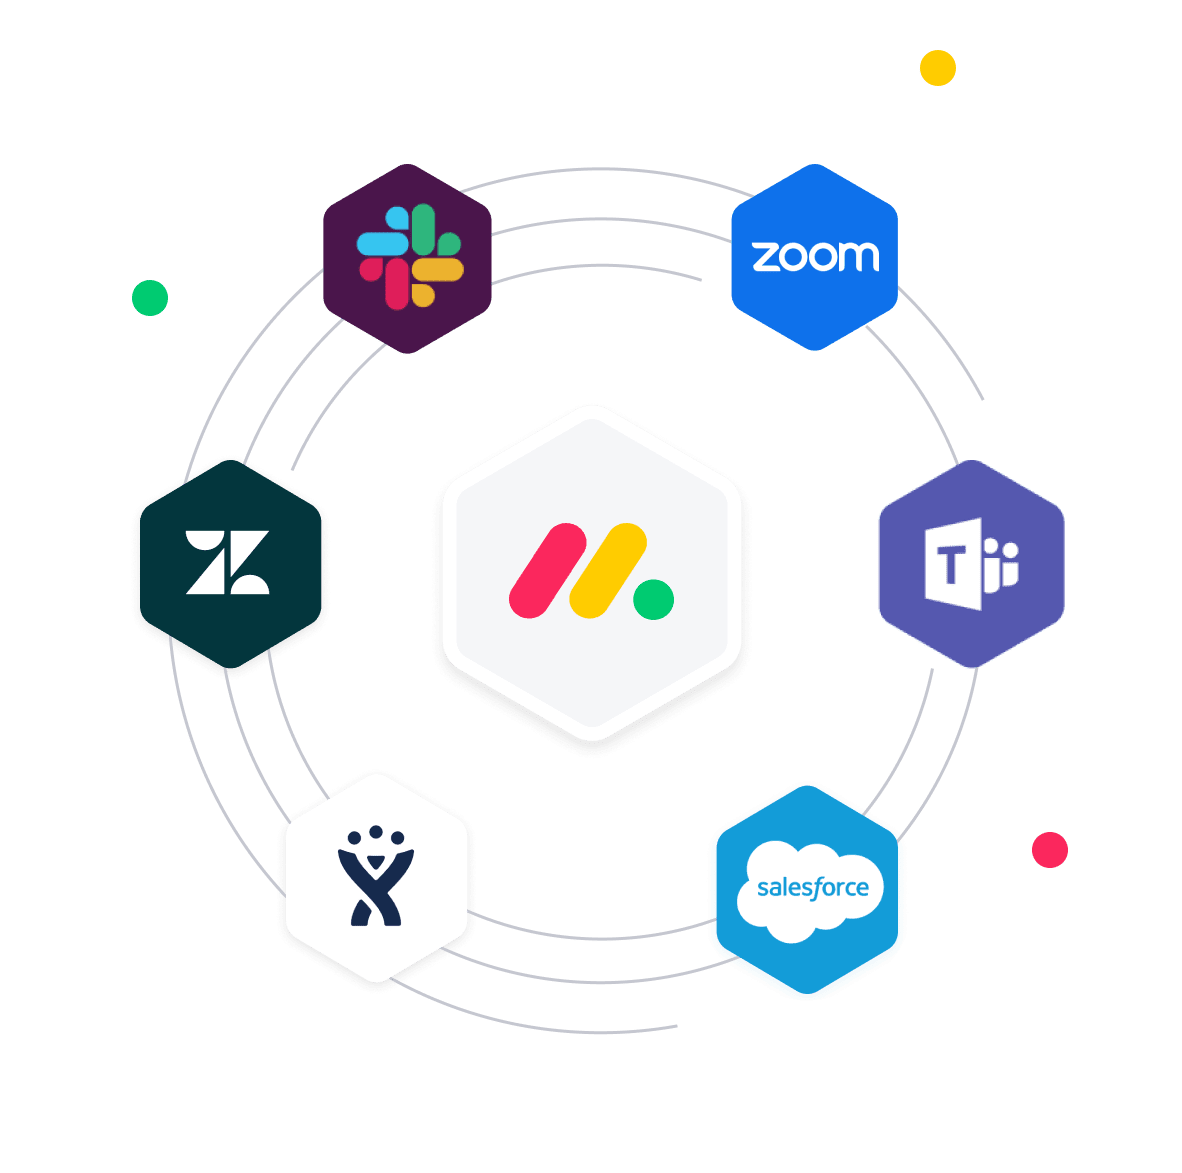 Example of monday.com's tech partners including Slack, Zendesk, Salesforce and Microsoft Teams